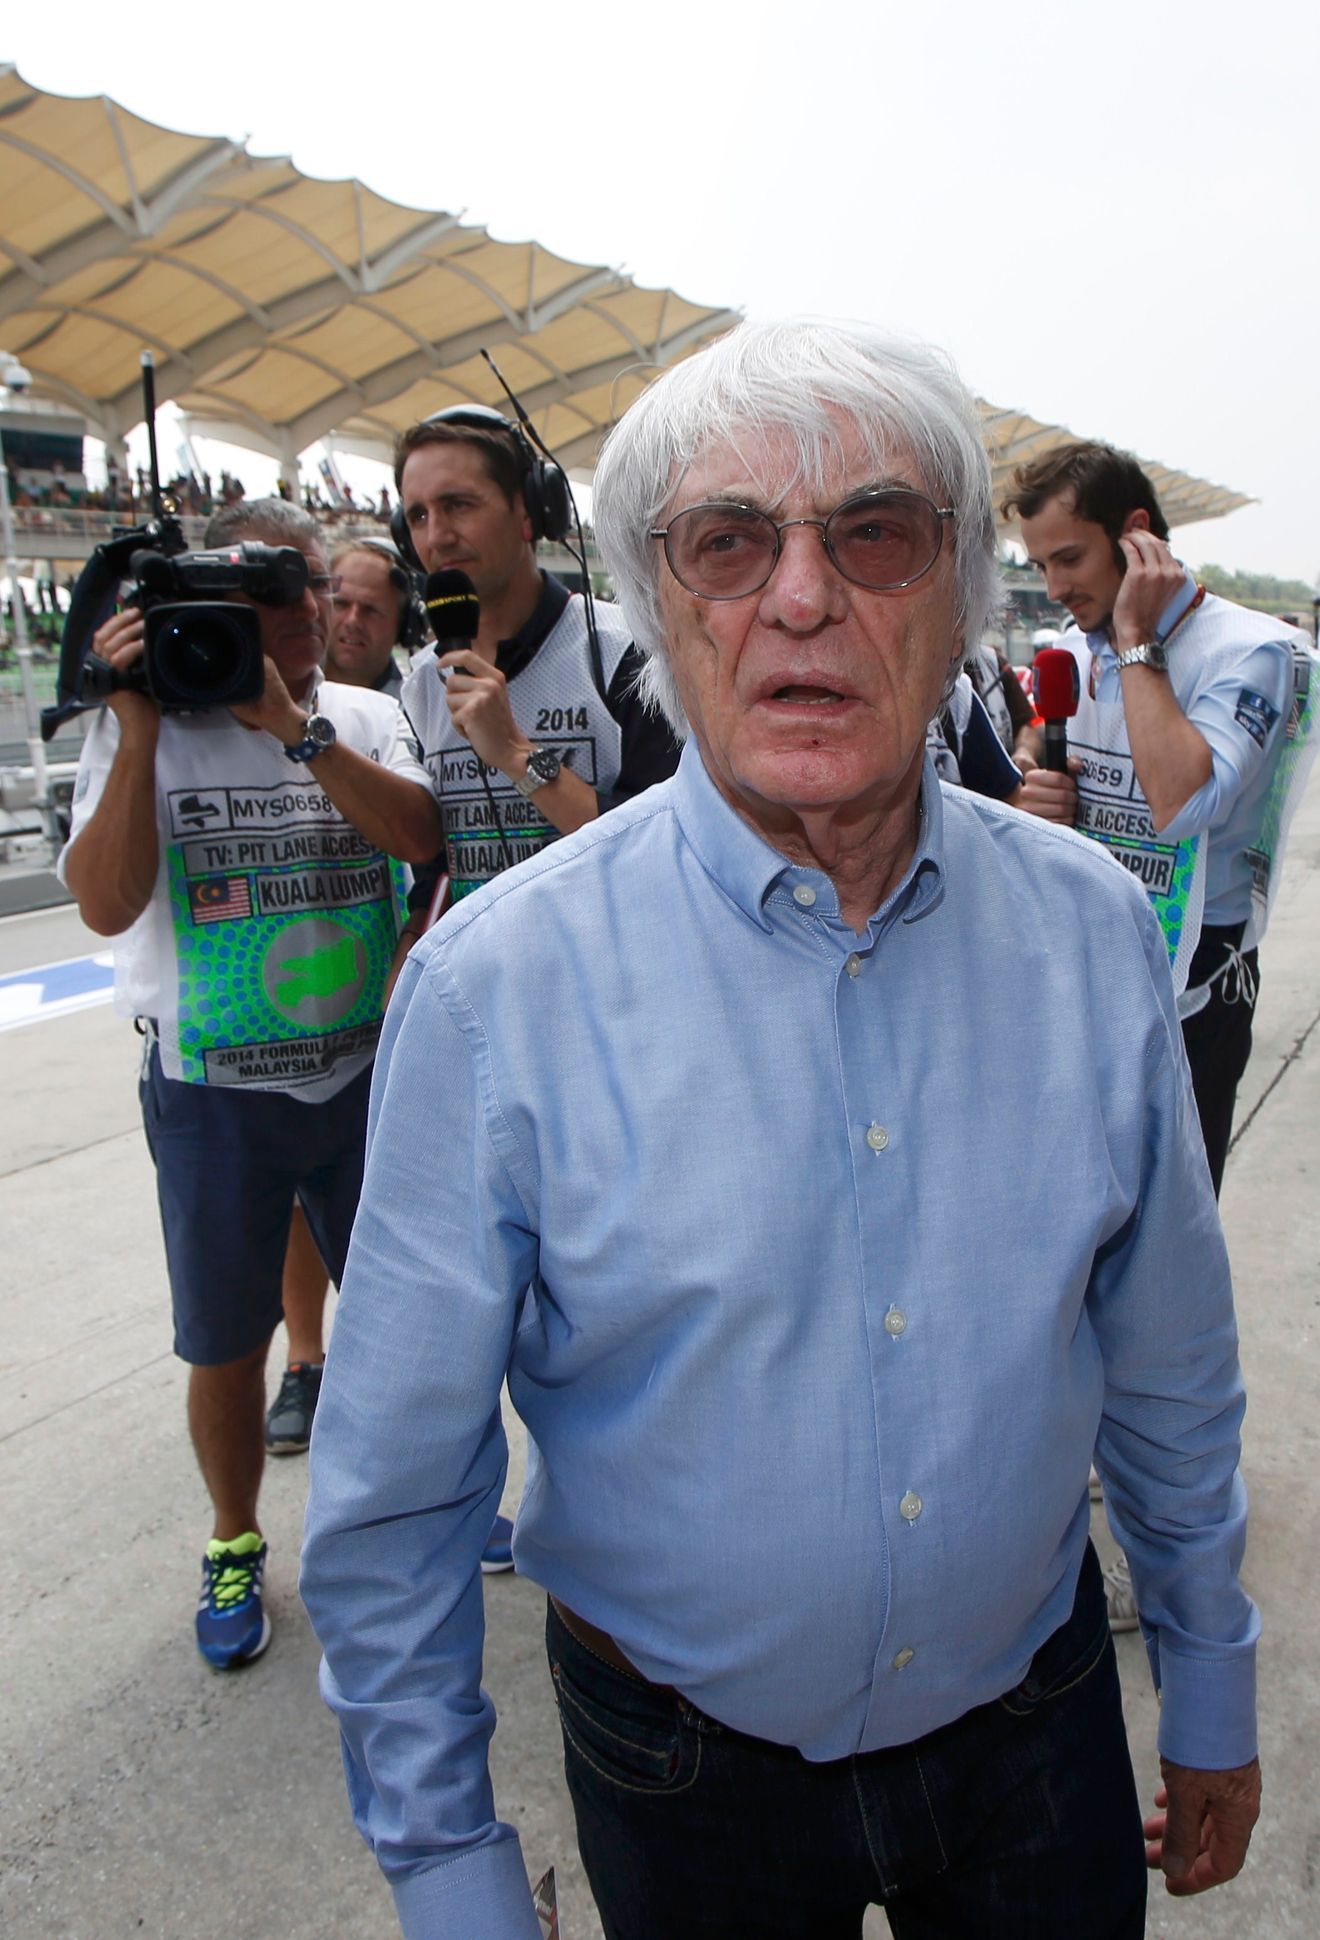 Formula One commercial supremo Ecclestone walks in the pit lane during the second practice session of the Malaysian F1 Grand Prix at Sepang International Circuit outside Kuala Lumpur